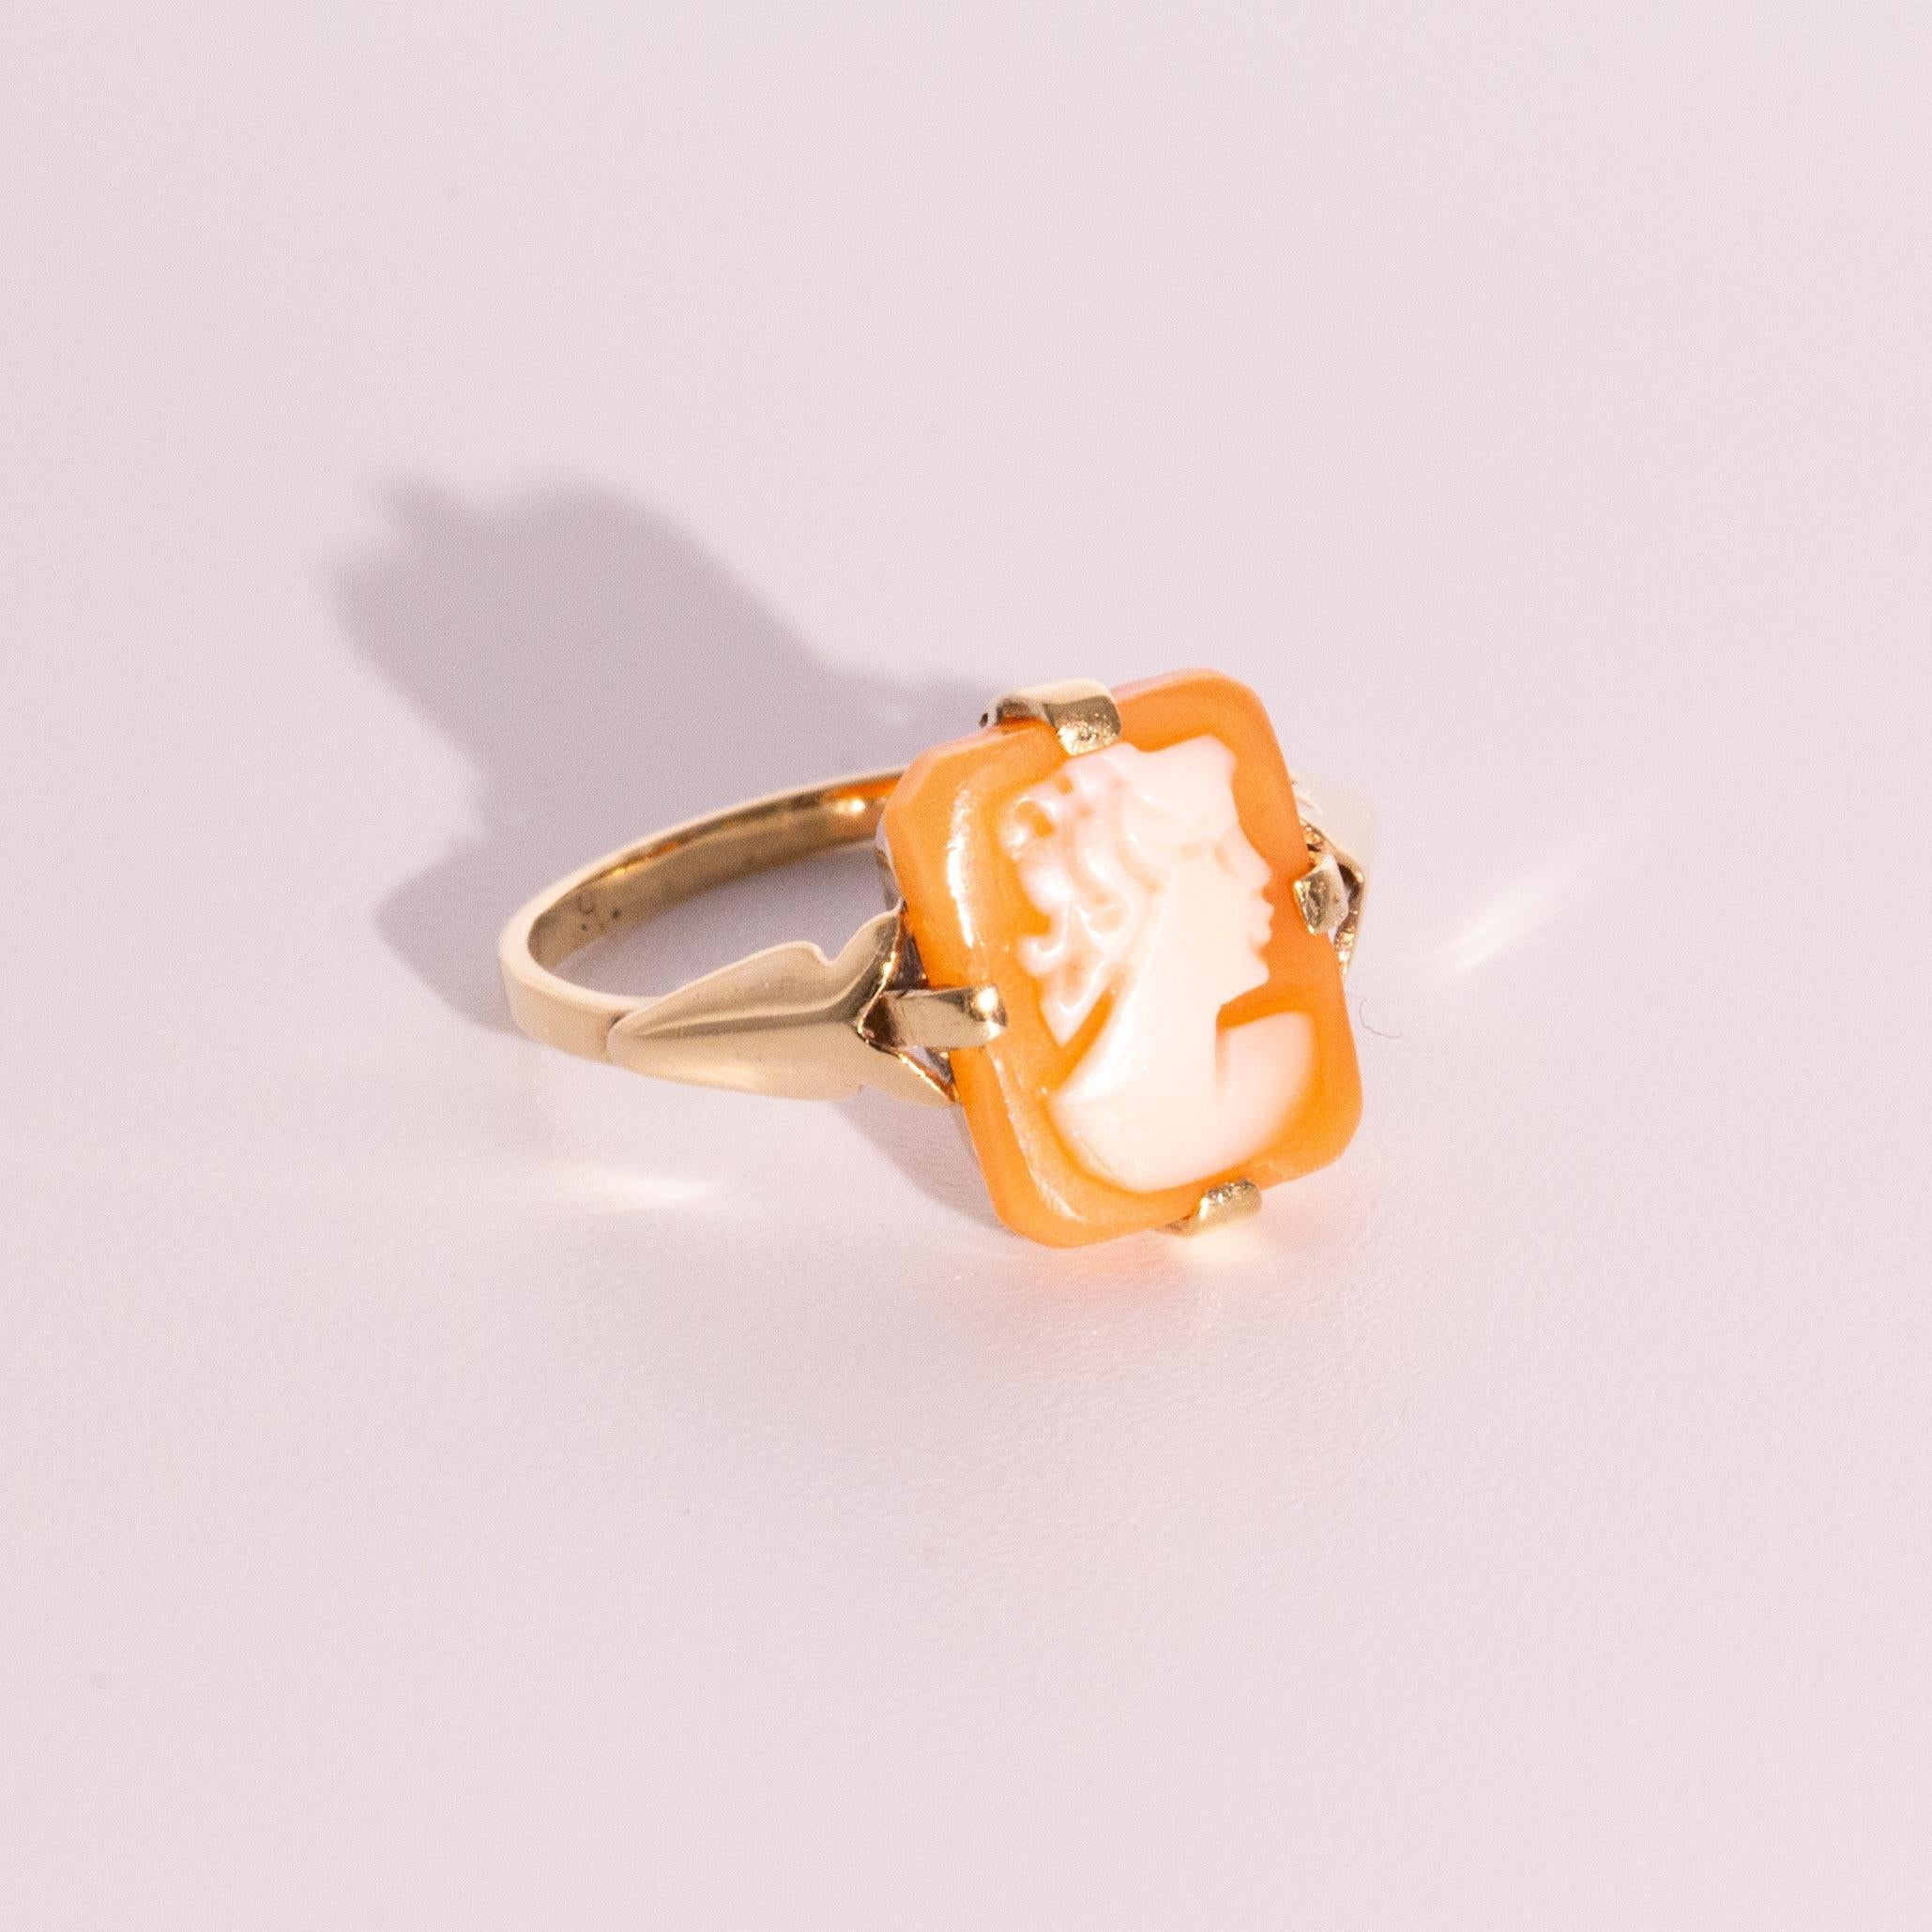 Crafted in 9 carat yellow gold is this petite vintage ring that holds a rectangular shell cameo in subtle neutral tones.  This petite cameo is a little more unique than others as most commonly cameos are oval in shape. We have called her the Calvina